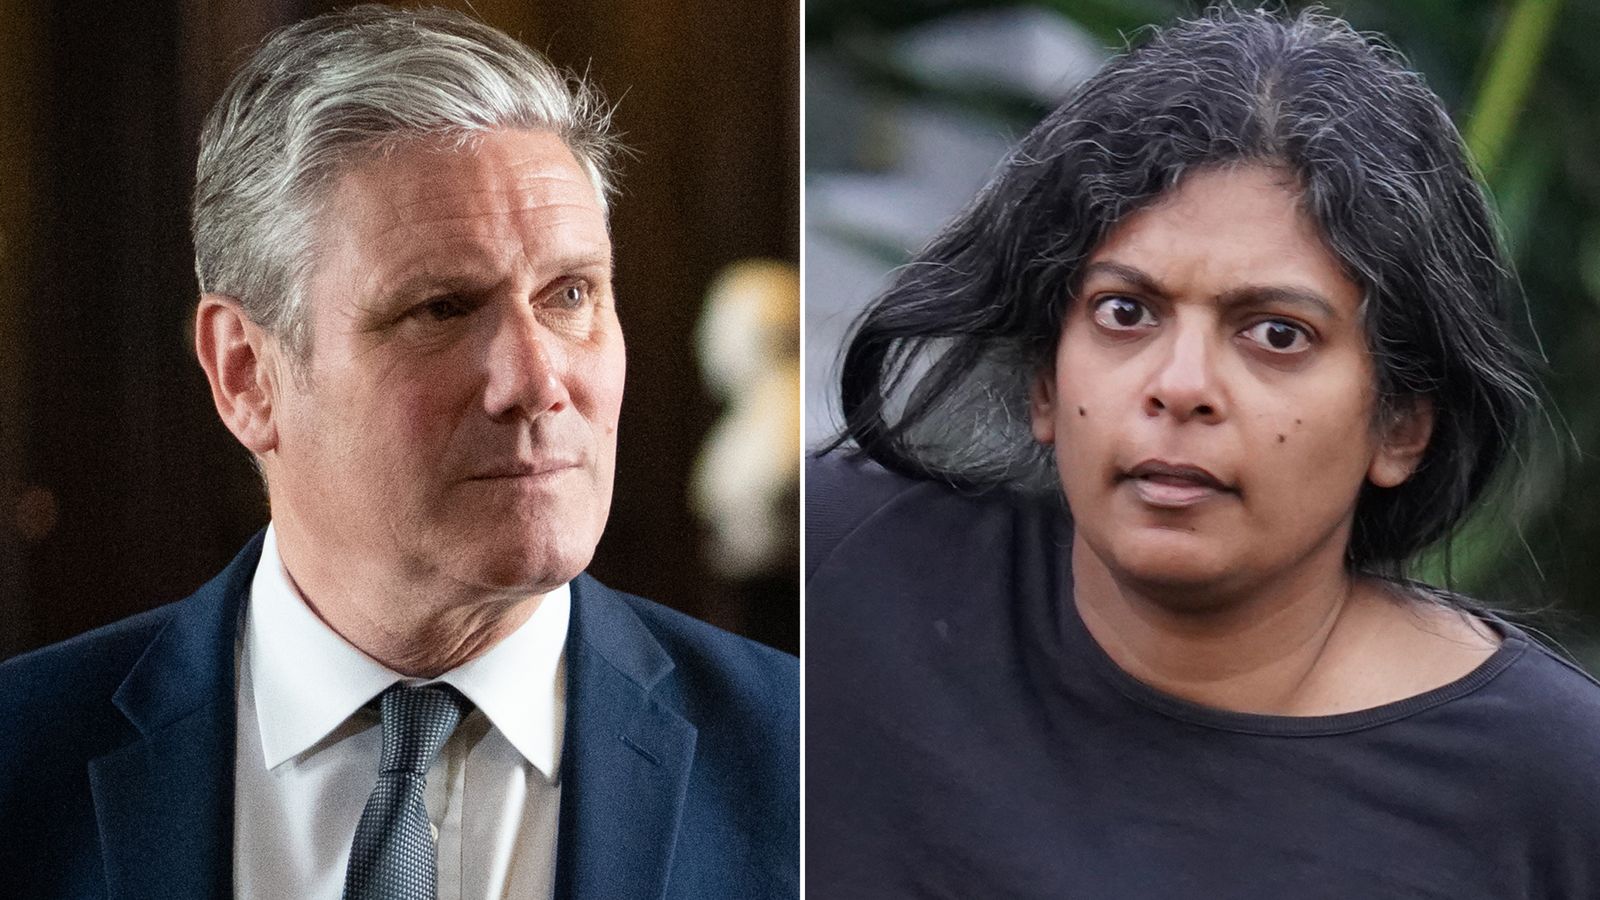 Keir Starmer criticises Labour MP Rupa Huq over 'racist' comments about chancellor 